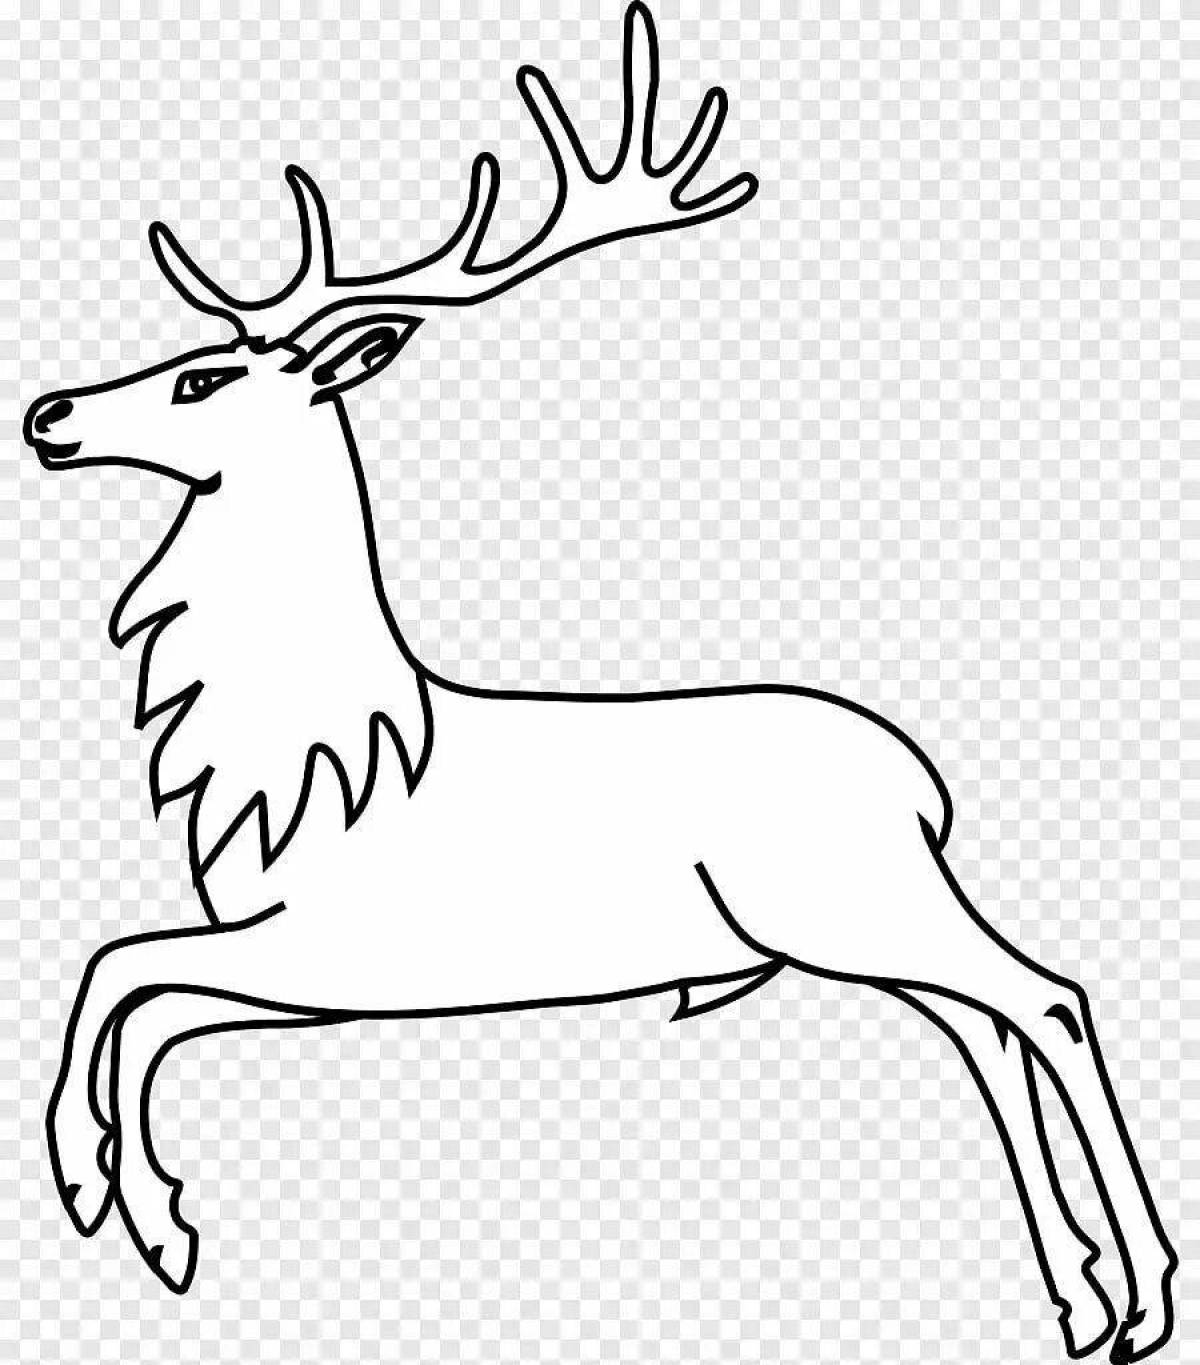 Awesome deer coloring pages